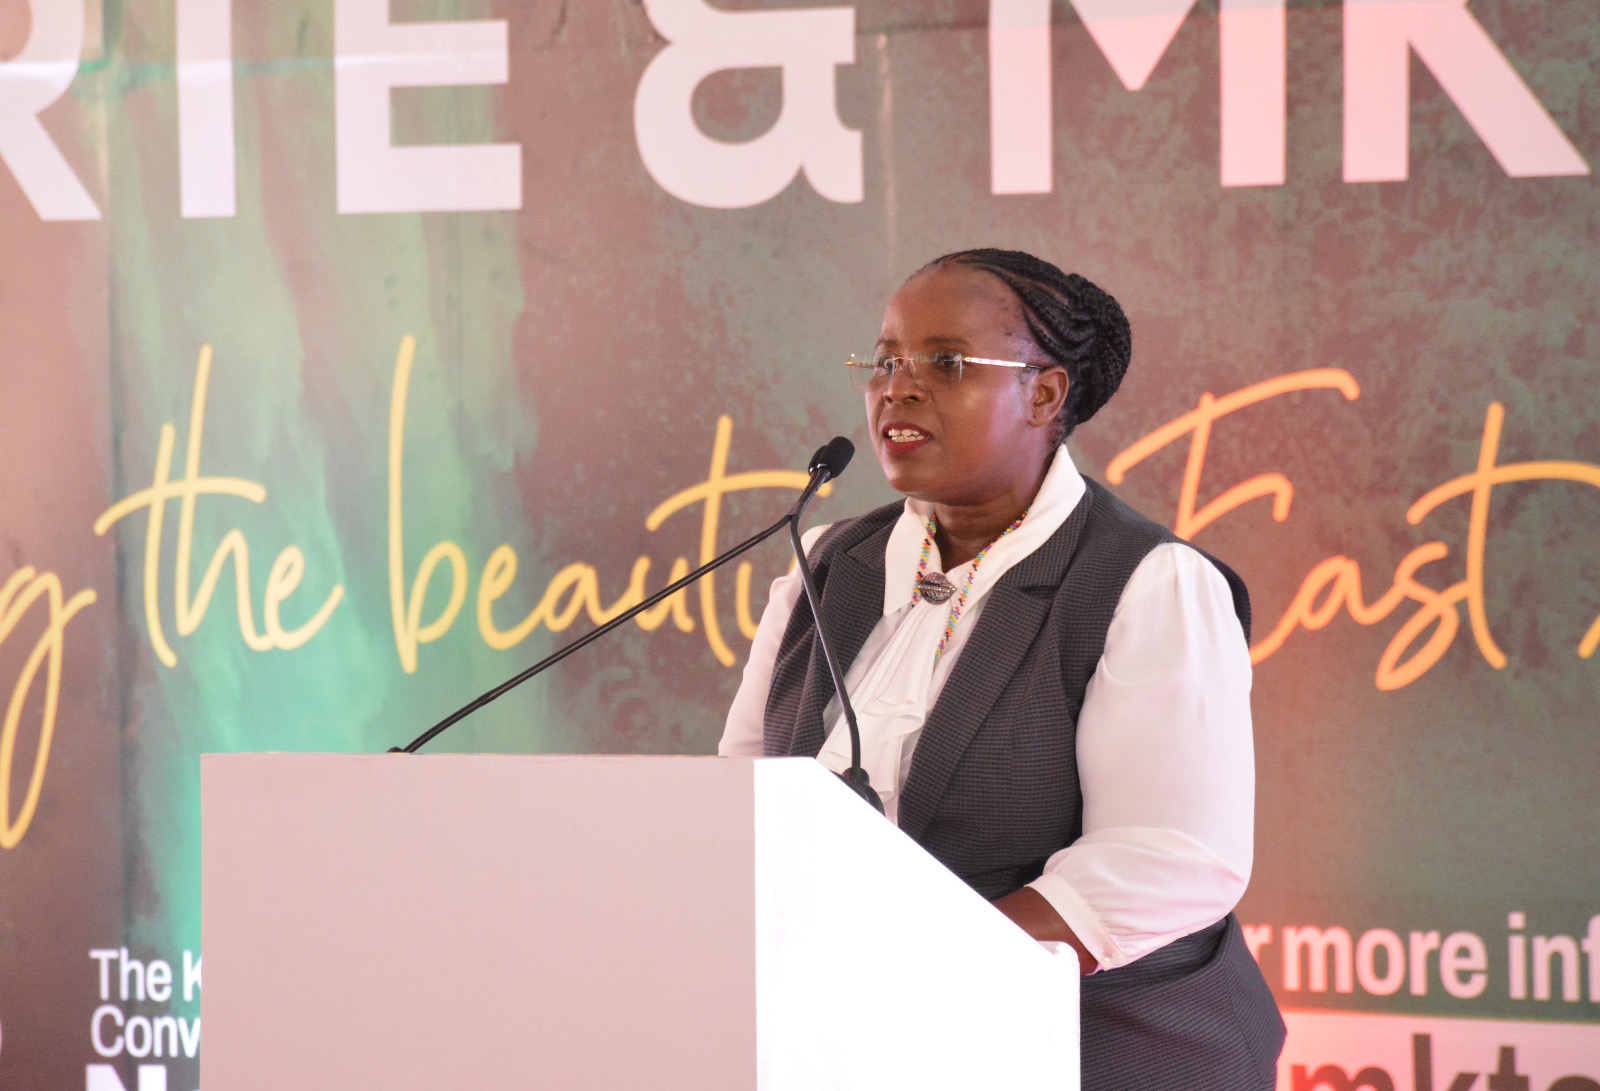 The Cabinet Secretary for East African Community, the ASALs and Regional Development-Kenya, Hon. Peninah Malonza, giving her remarks at the official opening of the 3rd East African Regional Tourism Expo and Magical Kenya Travel Expo, at the Kenyatta International Convention Centre.